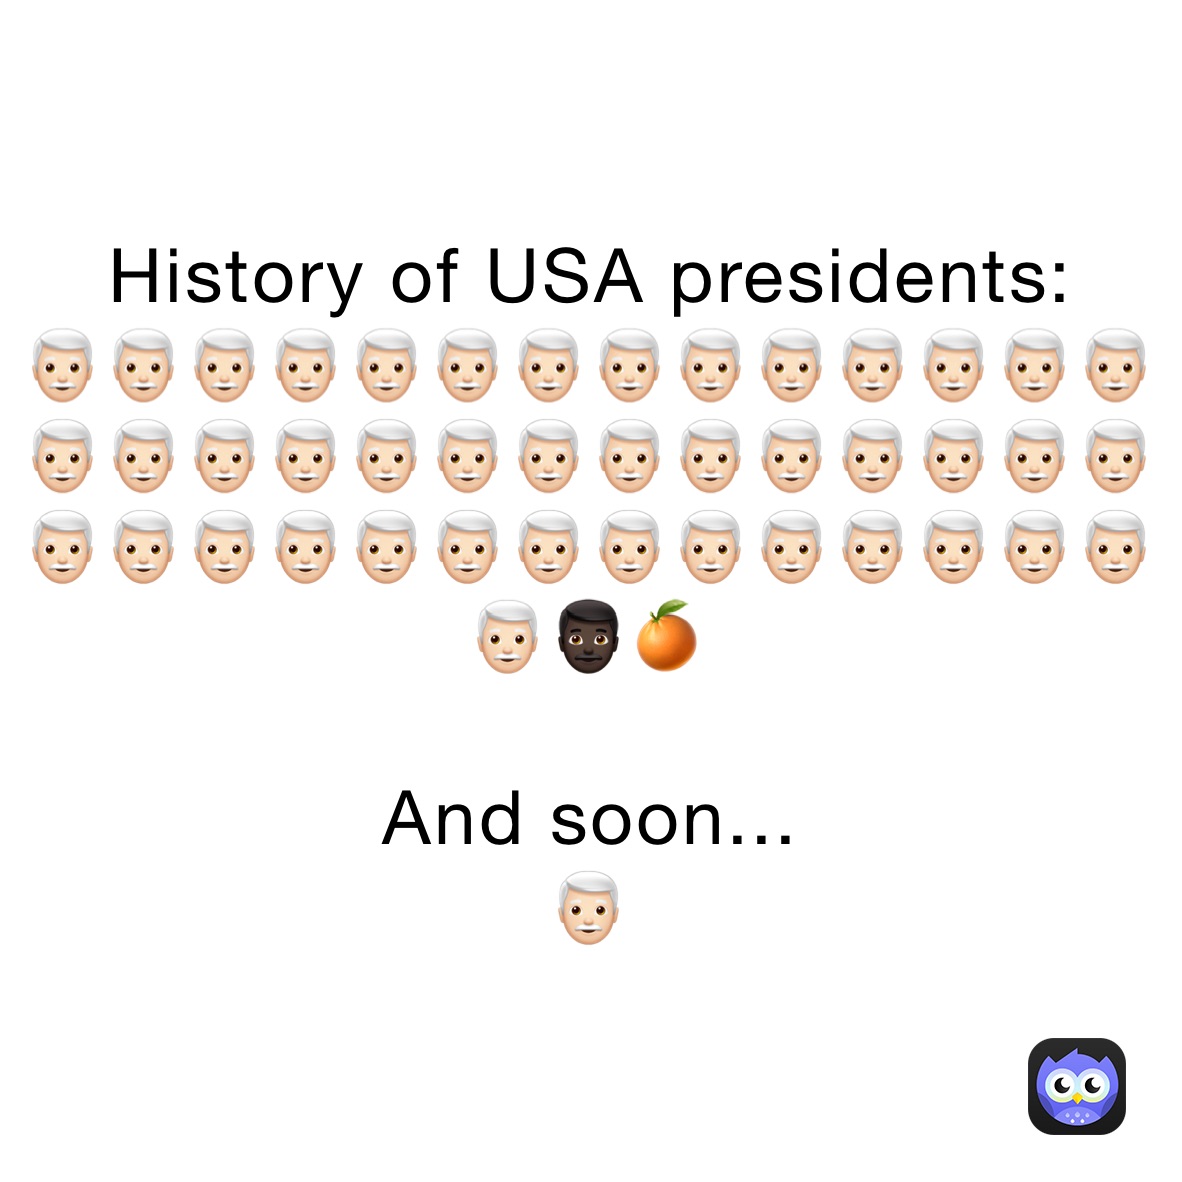 History of USA presidents:
👨🏻‍🦳👨🏻‍🦳👨🏻‍🦳👨🏻‍🦳👨🏻‍🦳👨🏻‍🦳👨🏻‍🦳👨🏻‍🦳👨🏻‍🦳👨🏻‍🦳👨🏻‍🦳👨🏻‍🦳👨🏻‍🦳👨🏻‍🦳👨🏻‍🦳👨🏻‍🦳👨🏻‍🦳👨🏻‍🦳👨🏻‍🦳👨🏻‍🦳👨🏻‍🦳👨🏻‍🦳👨🏻‍🦳👨🏻‍🦳👨🏻‍🦳👨🏻‍🦳👨🏻‍🦳👨🏻‍🦳👨🏻‍🦳👨🏻‍🦳👨🏻‍🦳👨🏻‍🦳👨🏻‍🦳👨🏻‍🦳👨🏻‍🦳👨🏻‍🦳👨🏻‍🦳👨🏻‍🦳👨🏻‍🦳👨🏻‍🦳👨🏻‍🦳👨🏻‍🦳👨🏻‍🦳👨🏿🍊

And soon...
👨🏻‍🦳